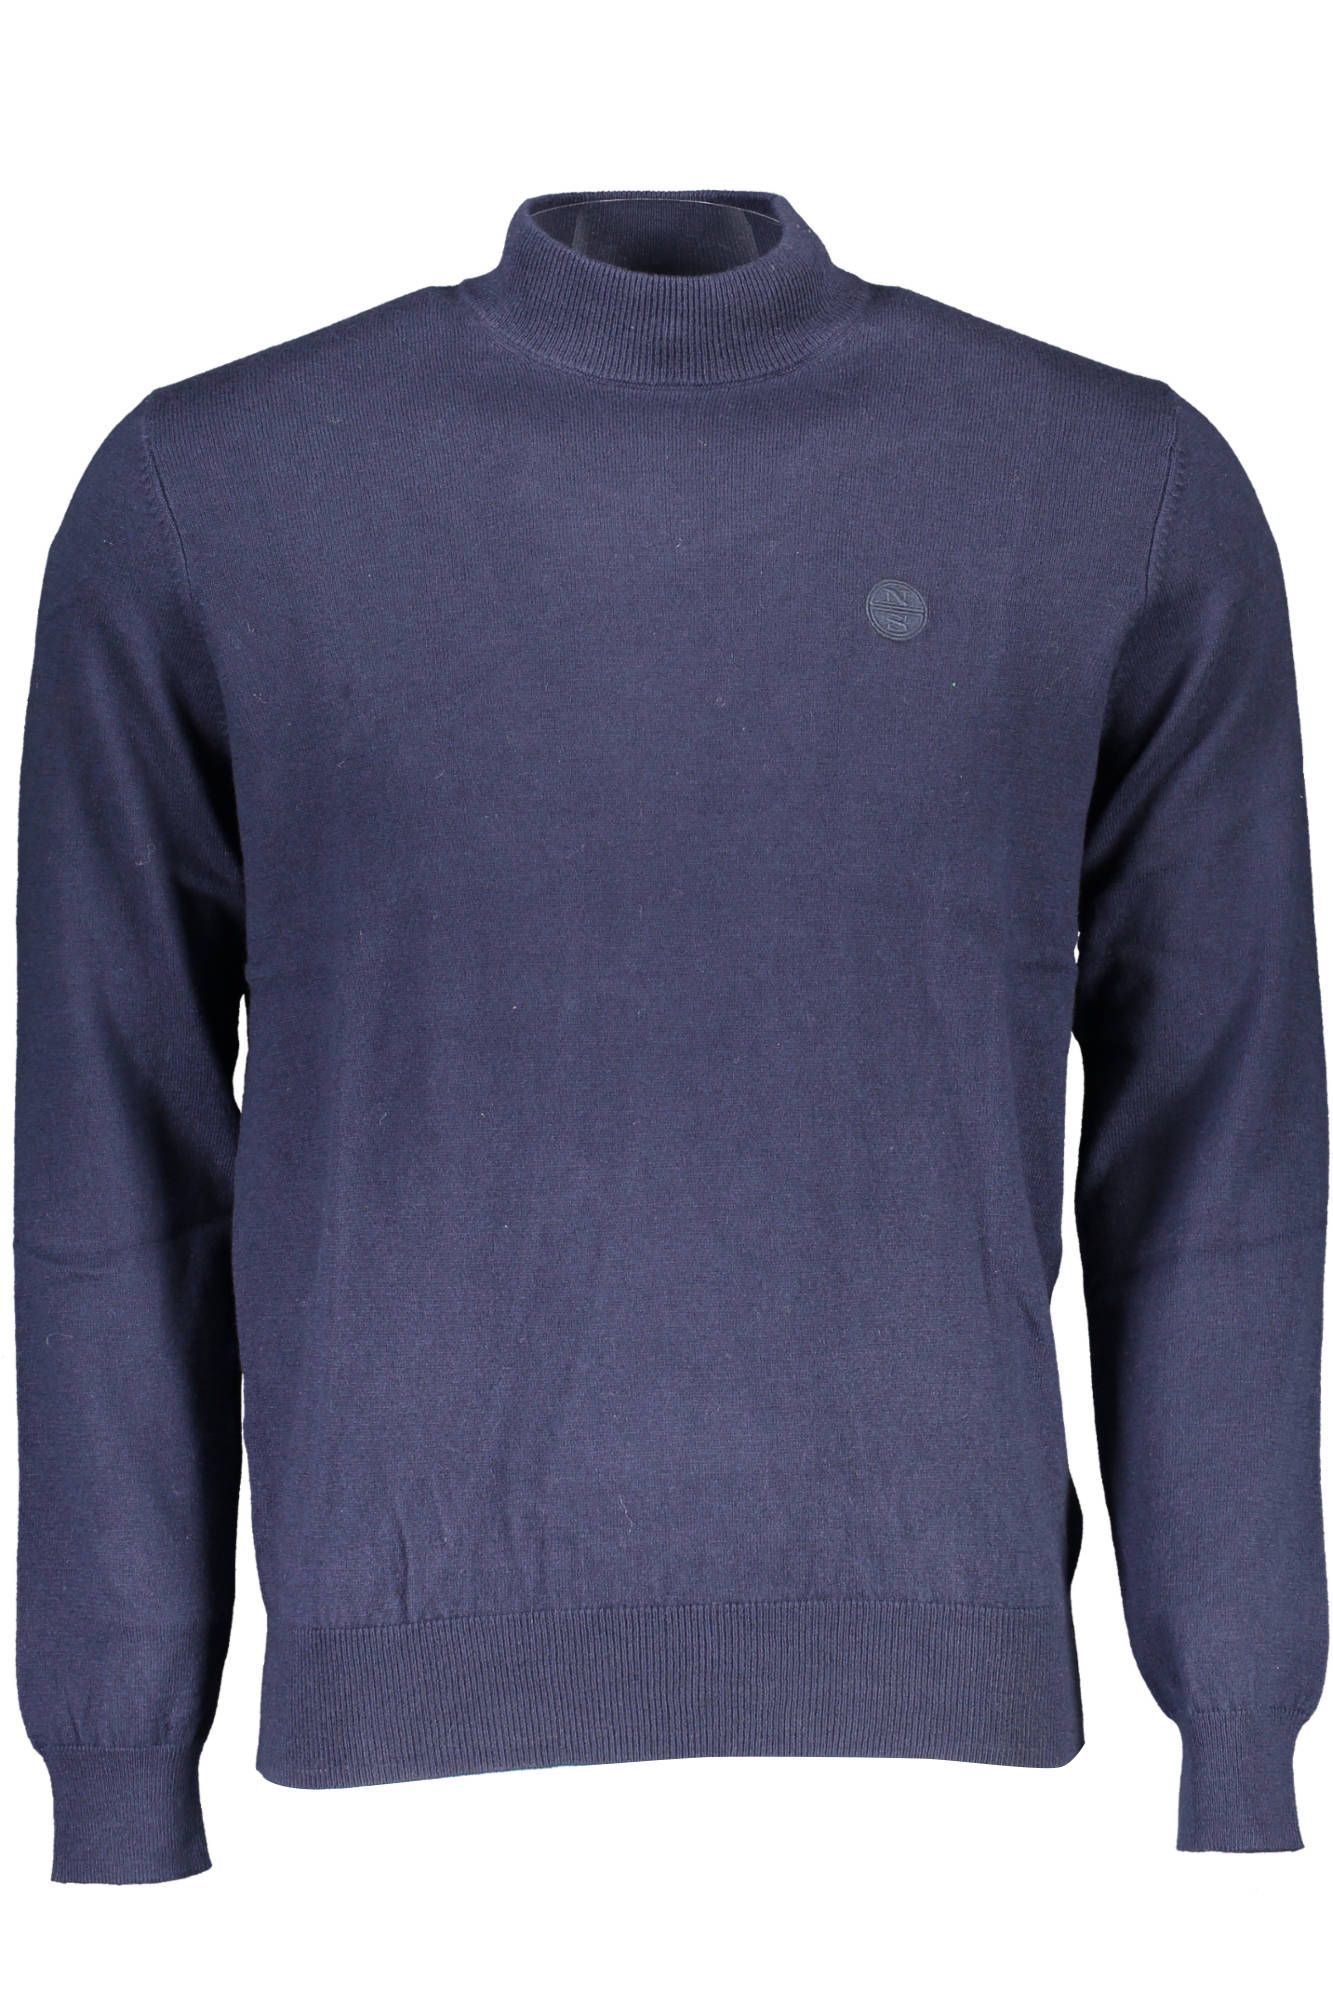 North Sails Eco-Conscious Turtleneck Sweater in Blue